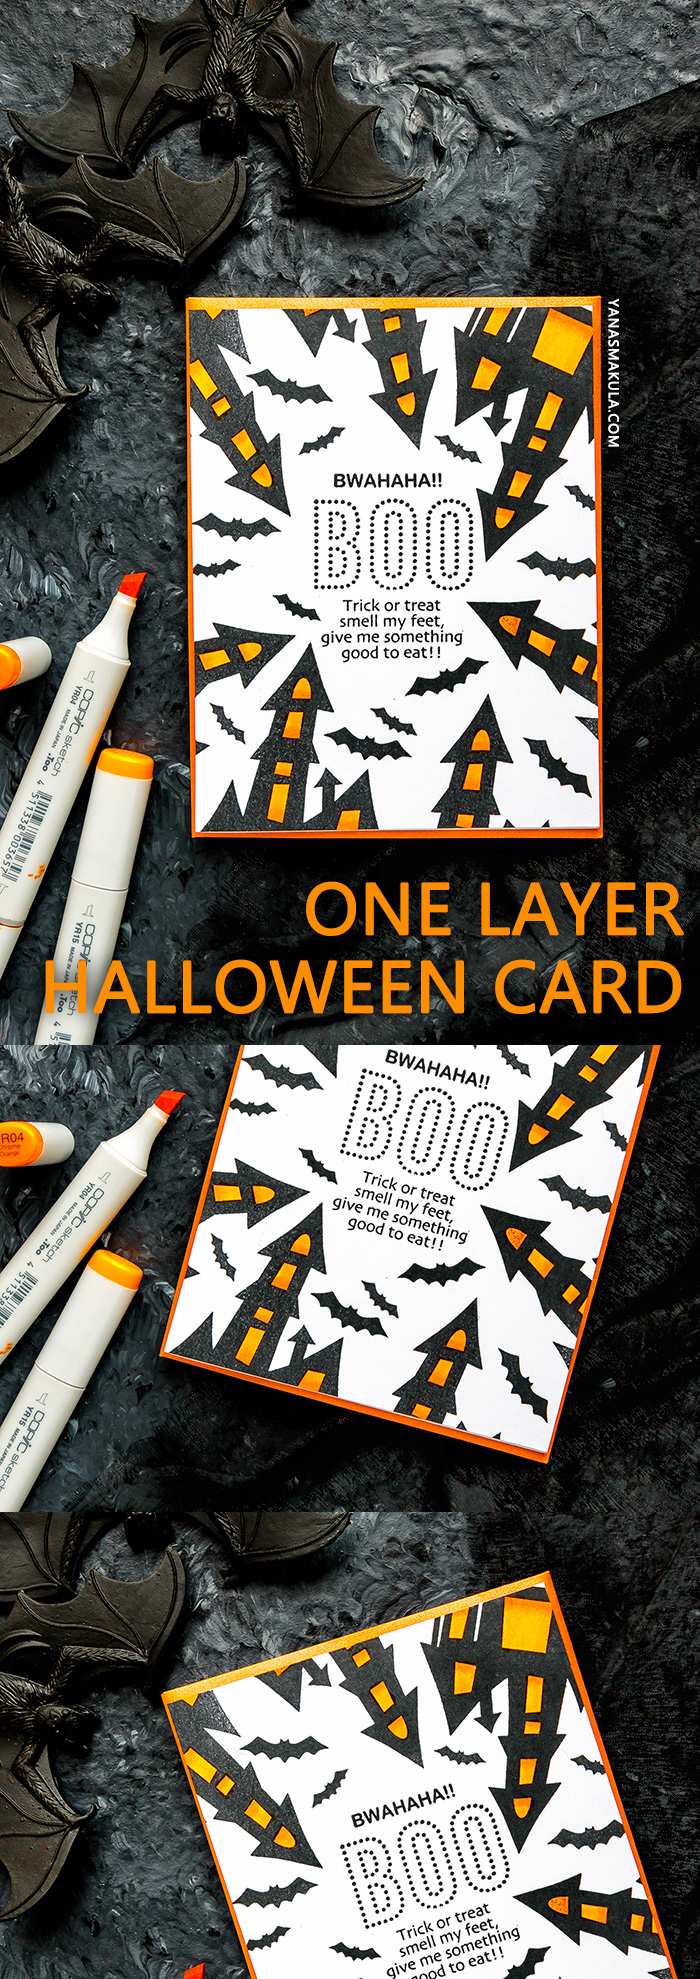 STAMPtember | Trick or Treat Smell My Feet. One Layer Halloween Card with Simon Says Stamp BWAHAHA sss101879 stamp set #yscadmaking #halloweencard #halloweenstationery #halloweencardmaking #halloweenDIY #halloween